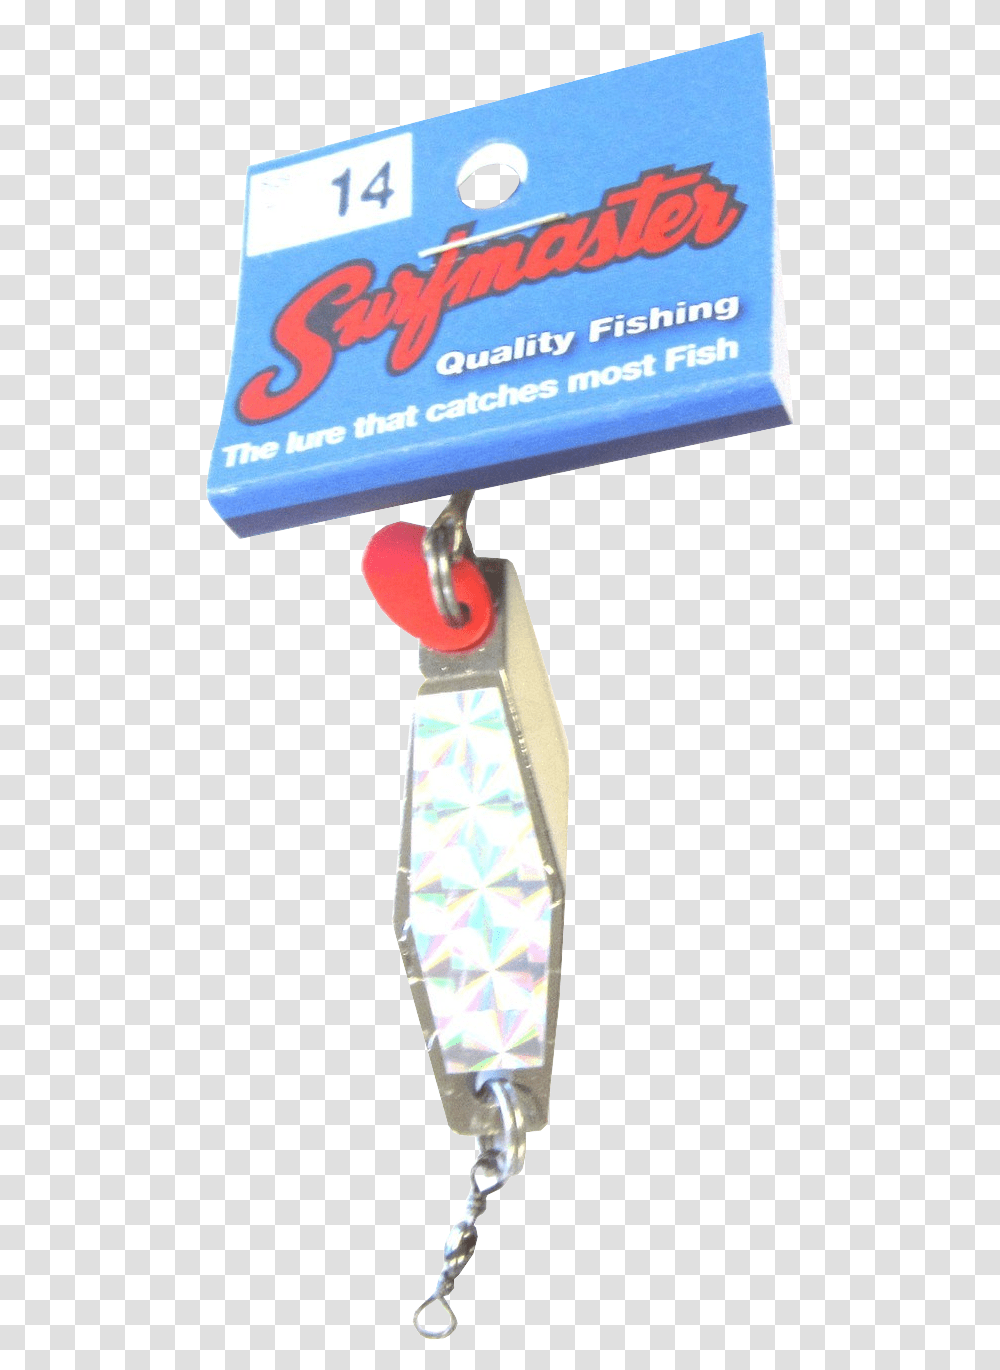 Surfmaster Hex Wobbler Lure Fish Hook, Weapon, Weaponry, Knife, Blade Transparent Png